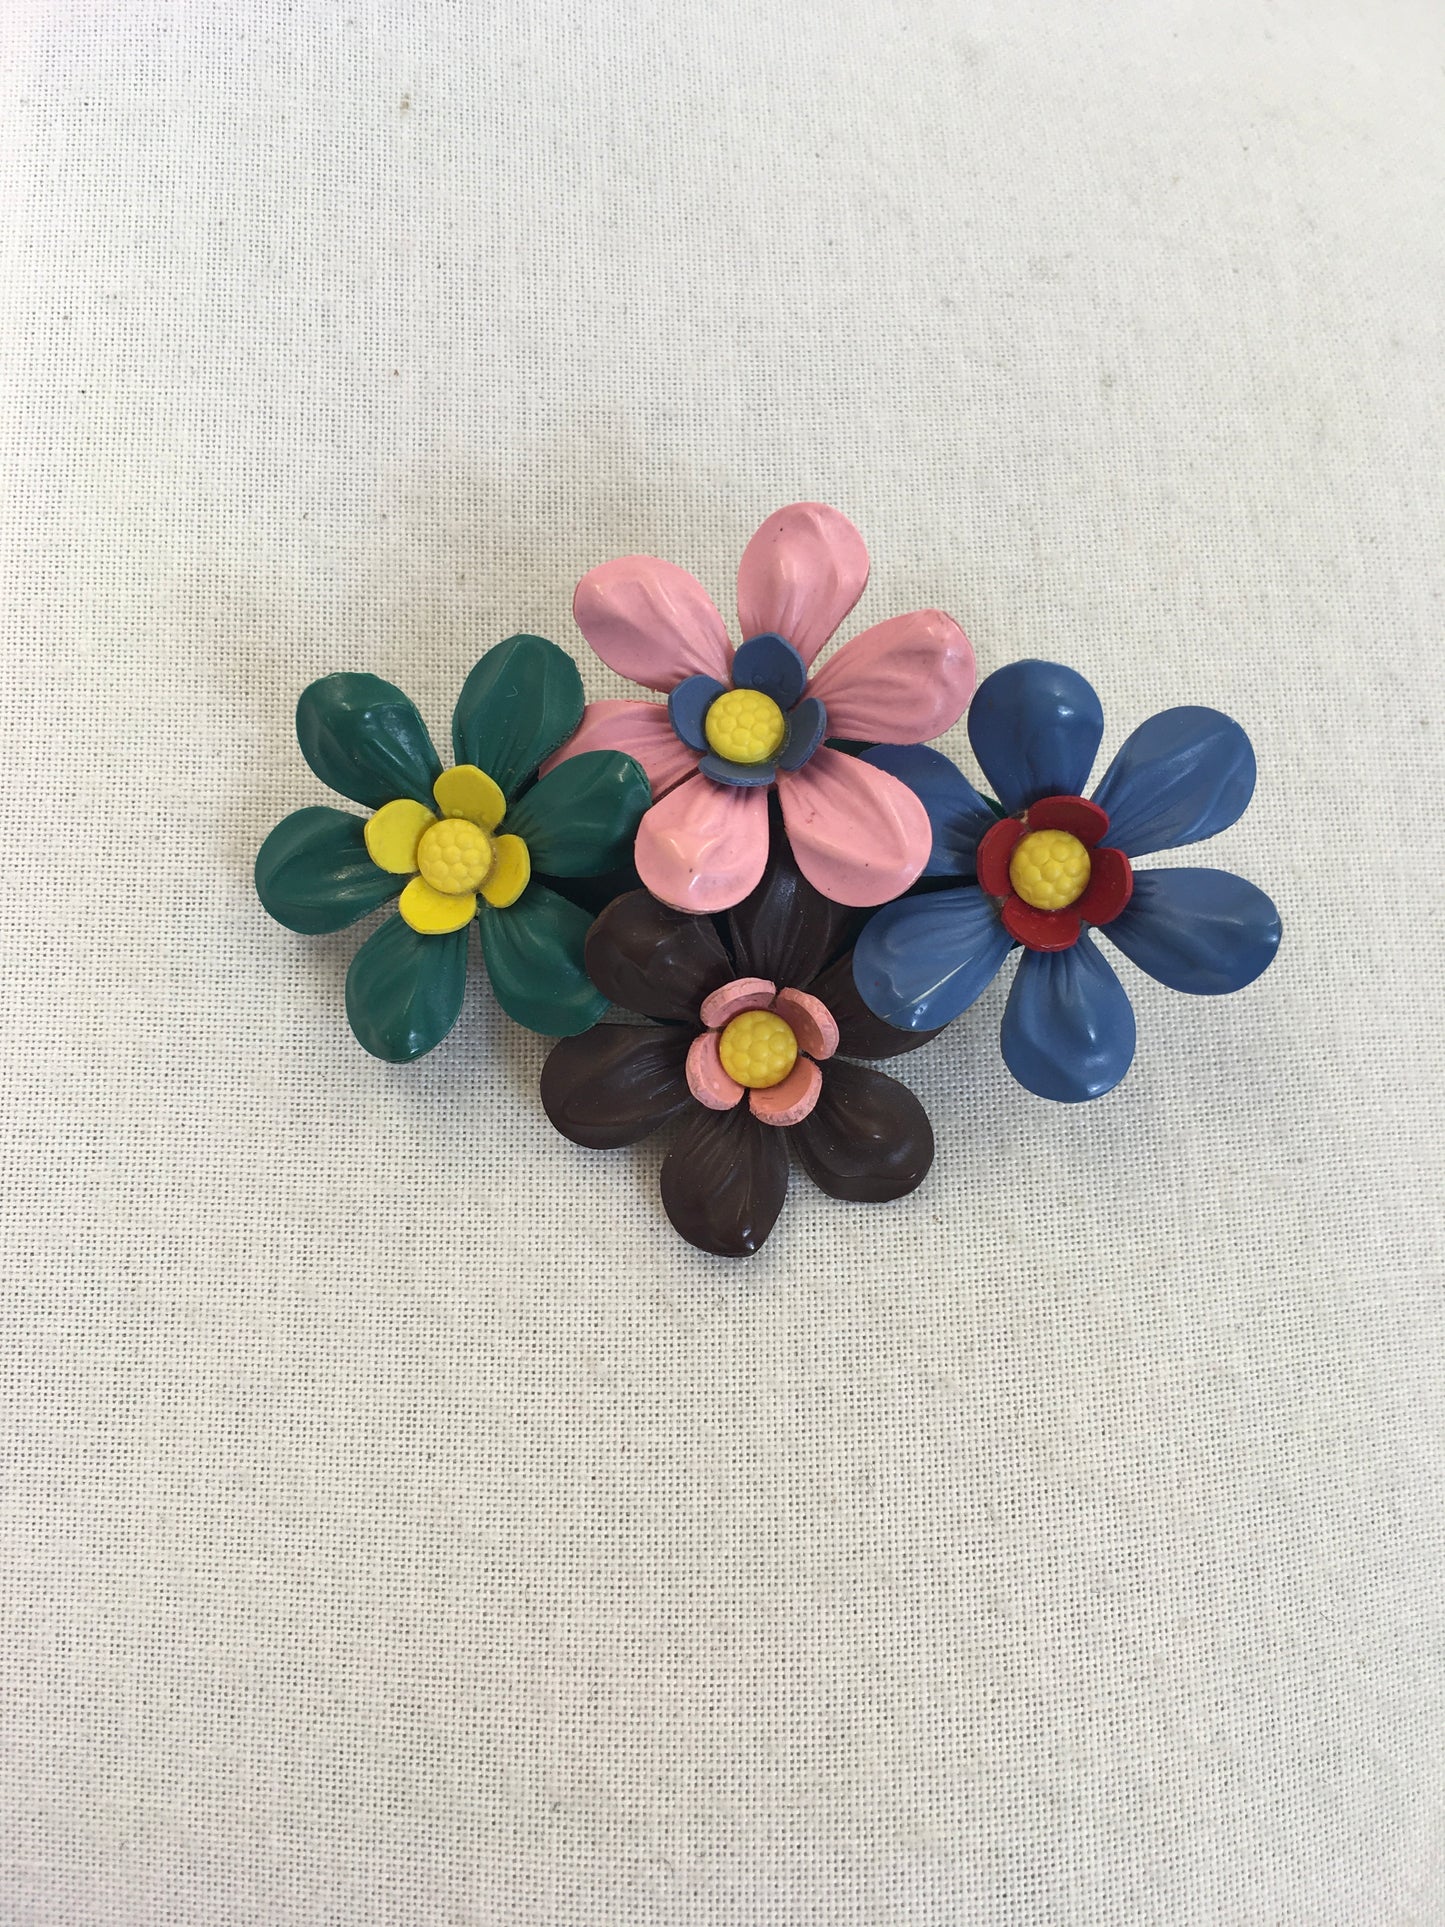 Original 1940’s Celluloid Floral Brooch - In Soft Pastels